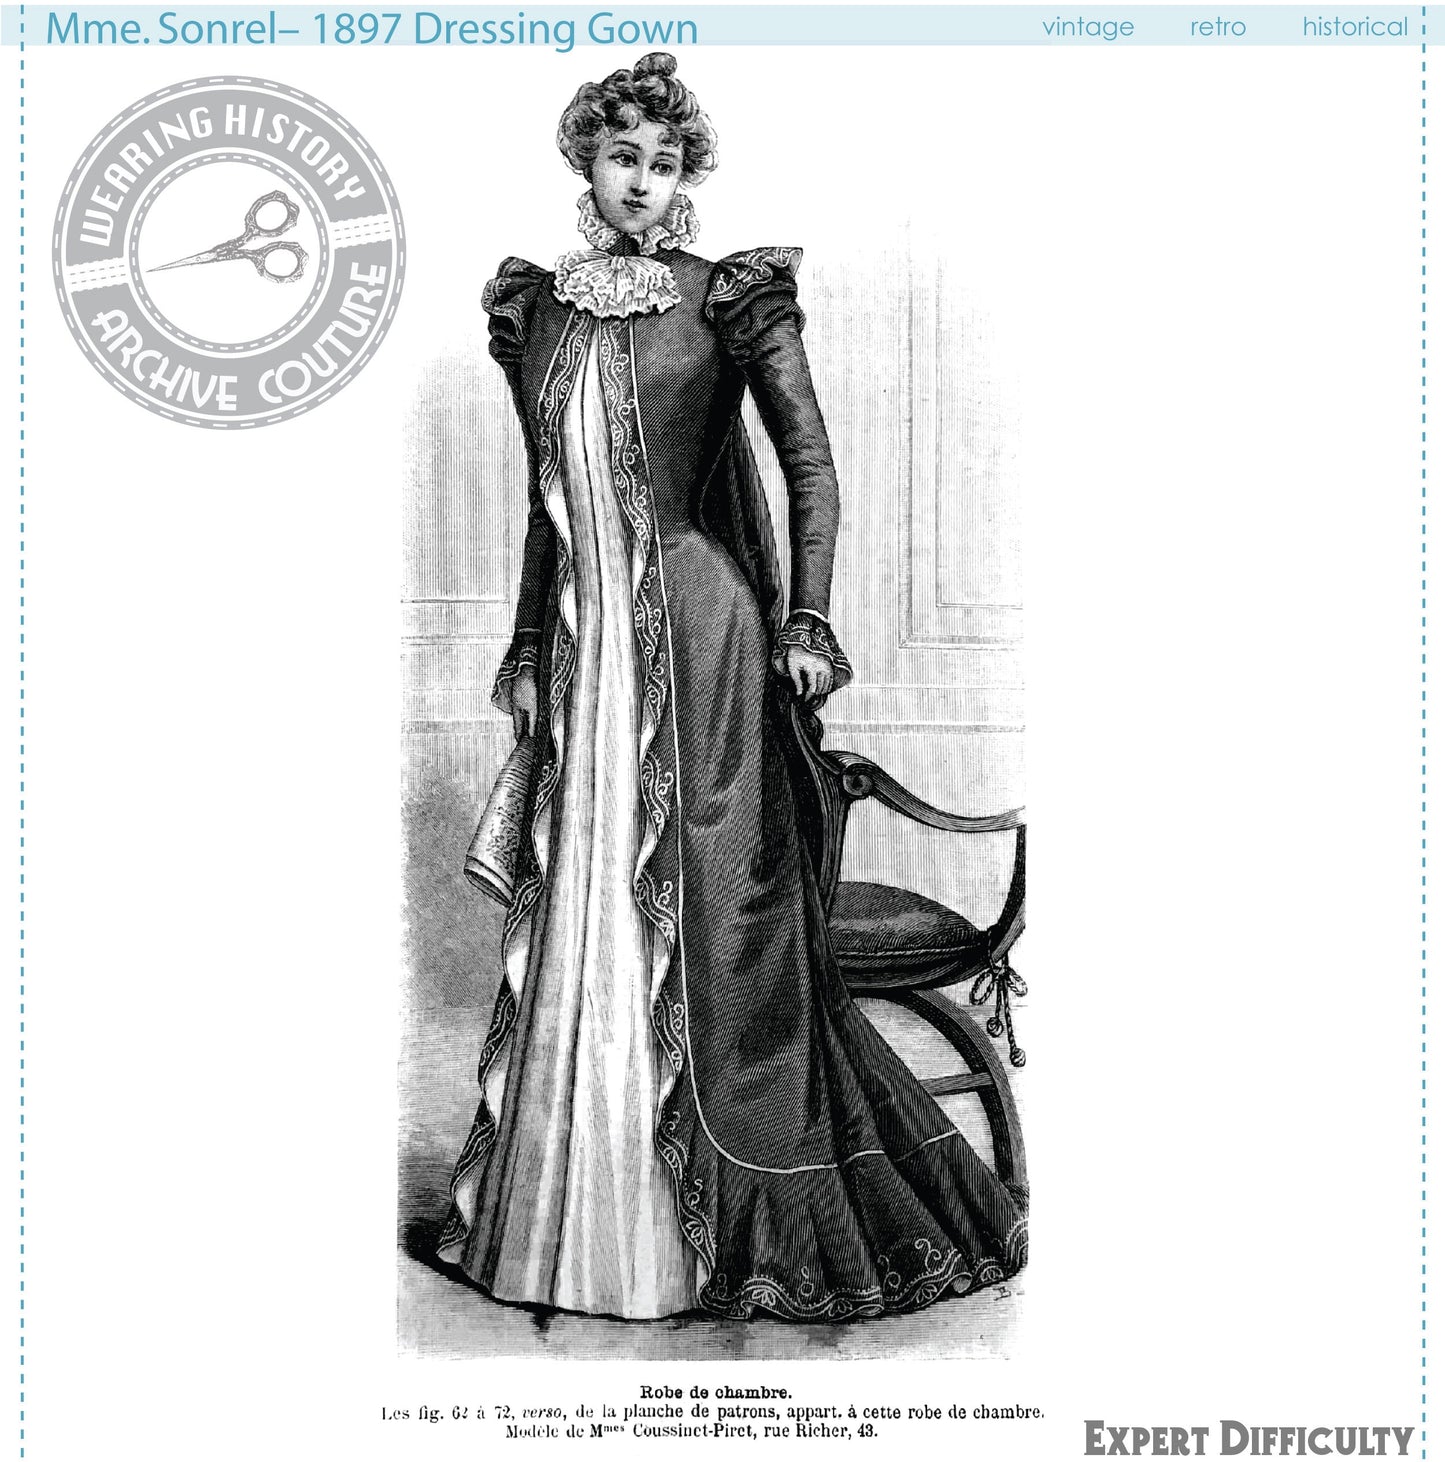 PRINTED PATTERN- 1890s Victorian Dressing Gown- Tea Gown- Wrapper- Bust 37"